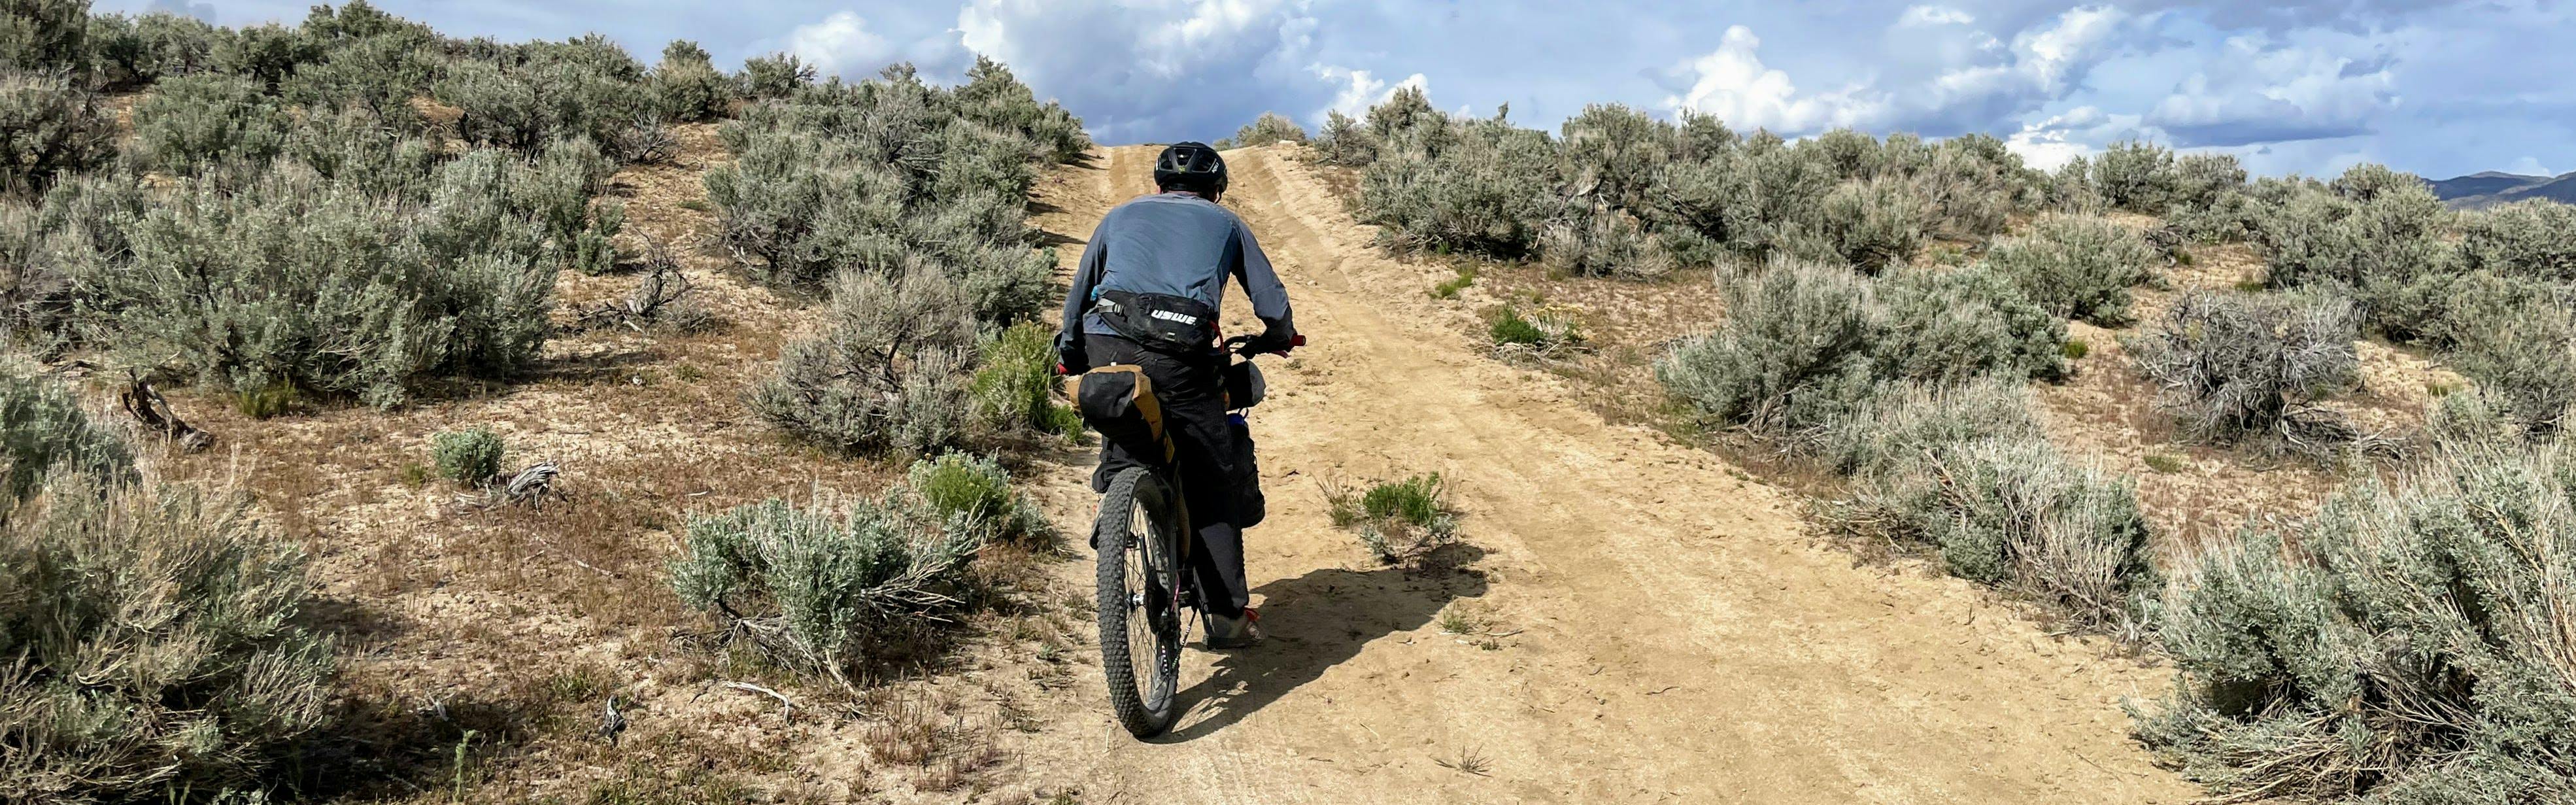 A biker rides up a dirt trail. There is sagebrush on the sides of the trail.